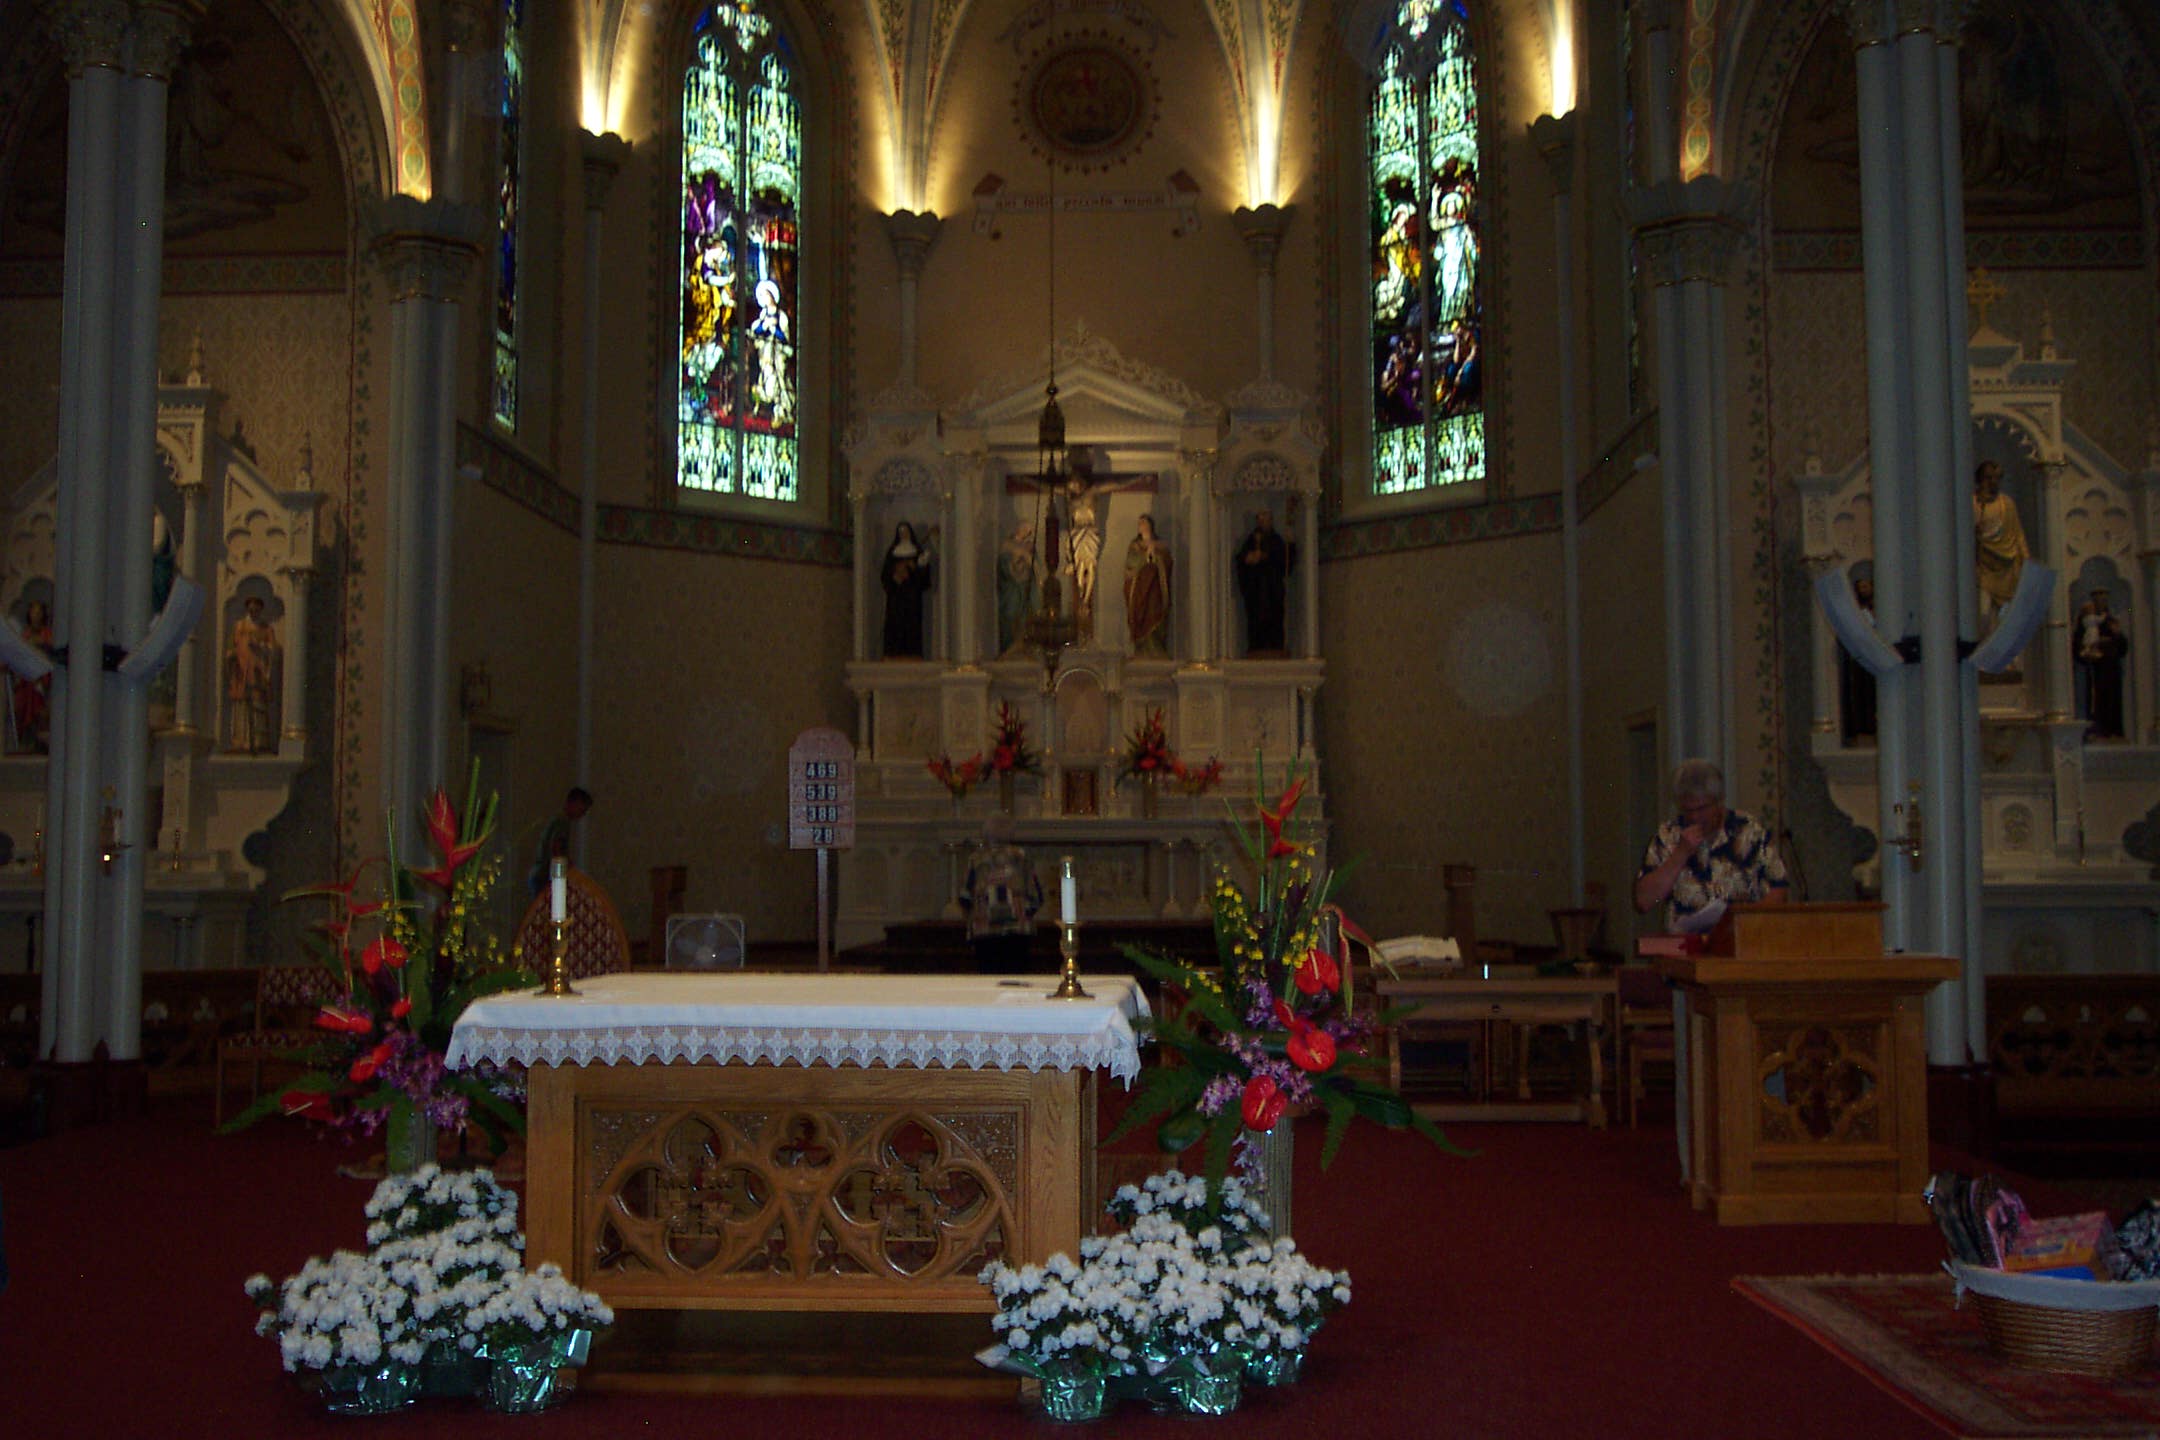 August 17, 2008, St Mary's Catholic Chuch, Mt. Angel, OR.